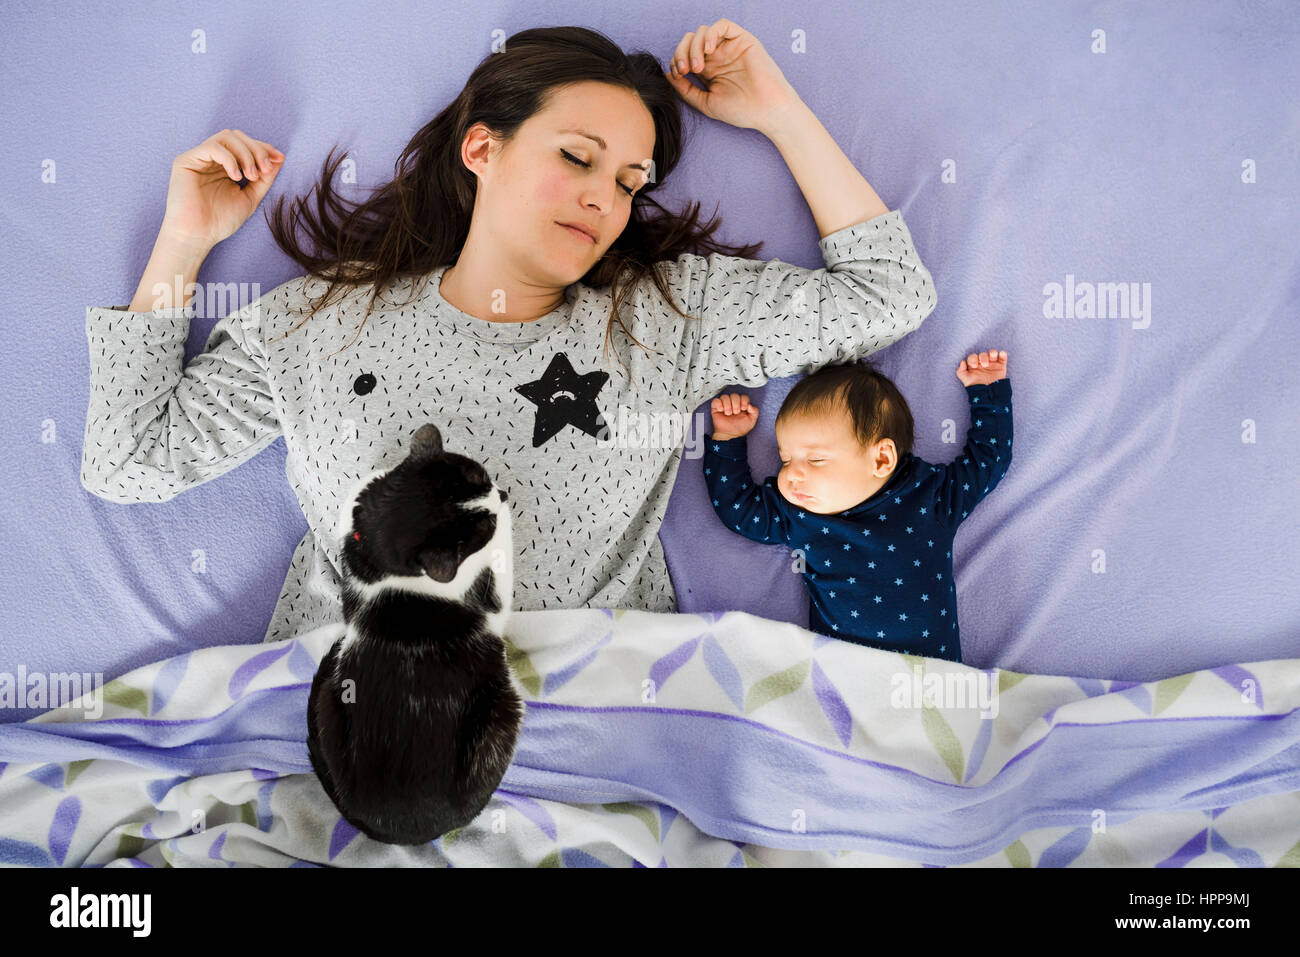 Newborn baby girl and mother sleeping in bed with cat watching Stock Photo